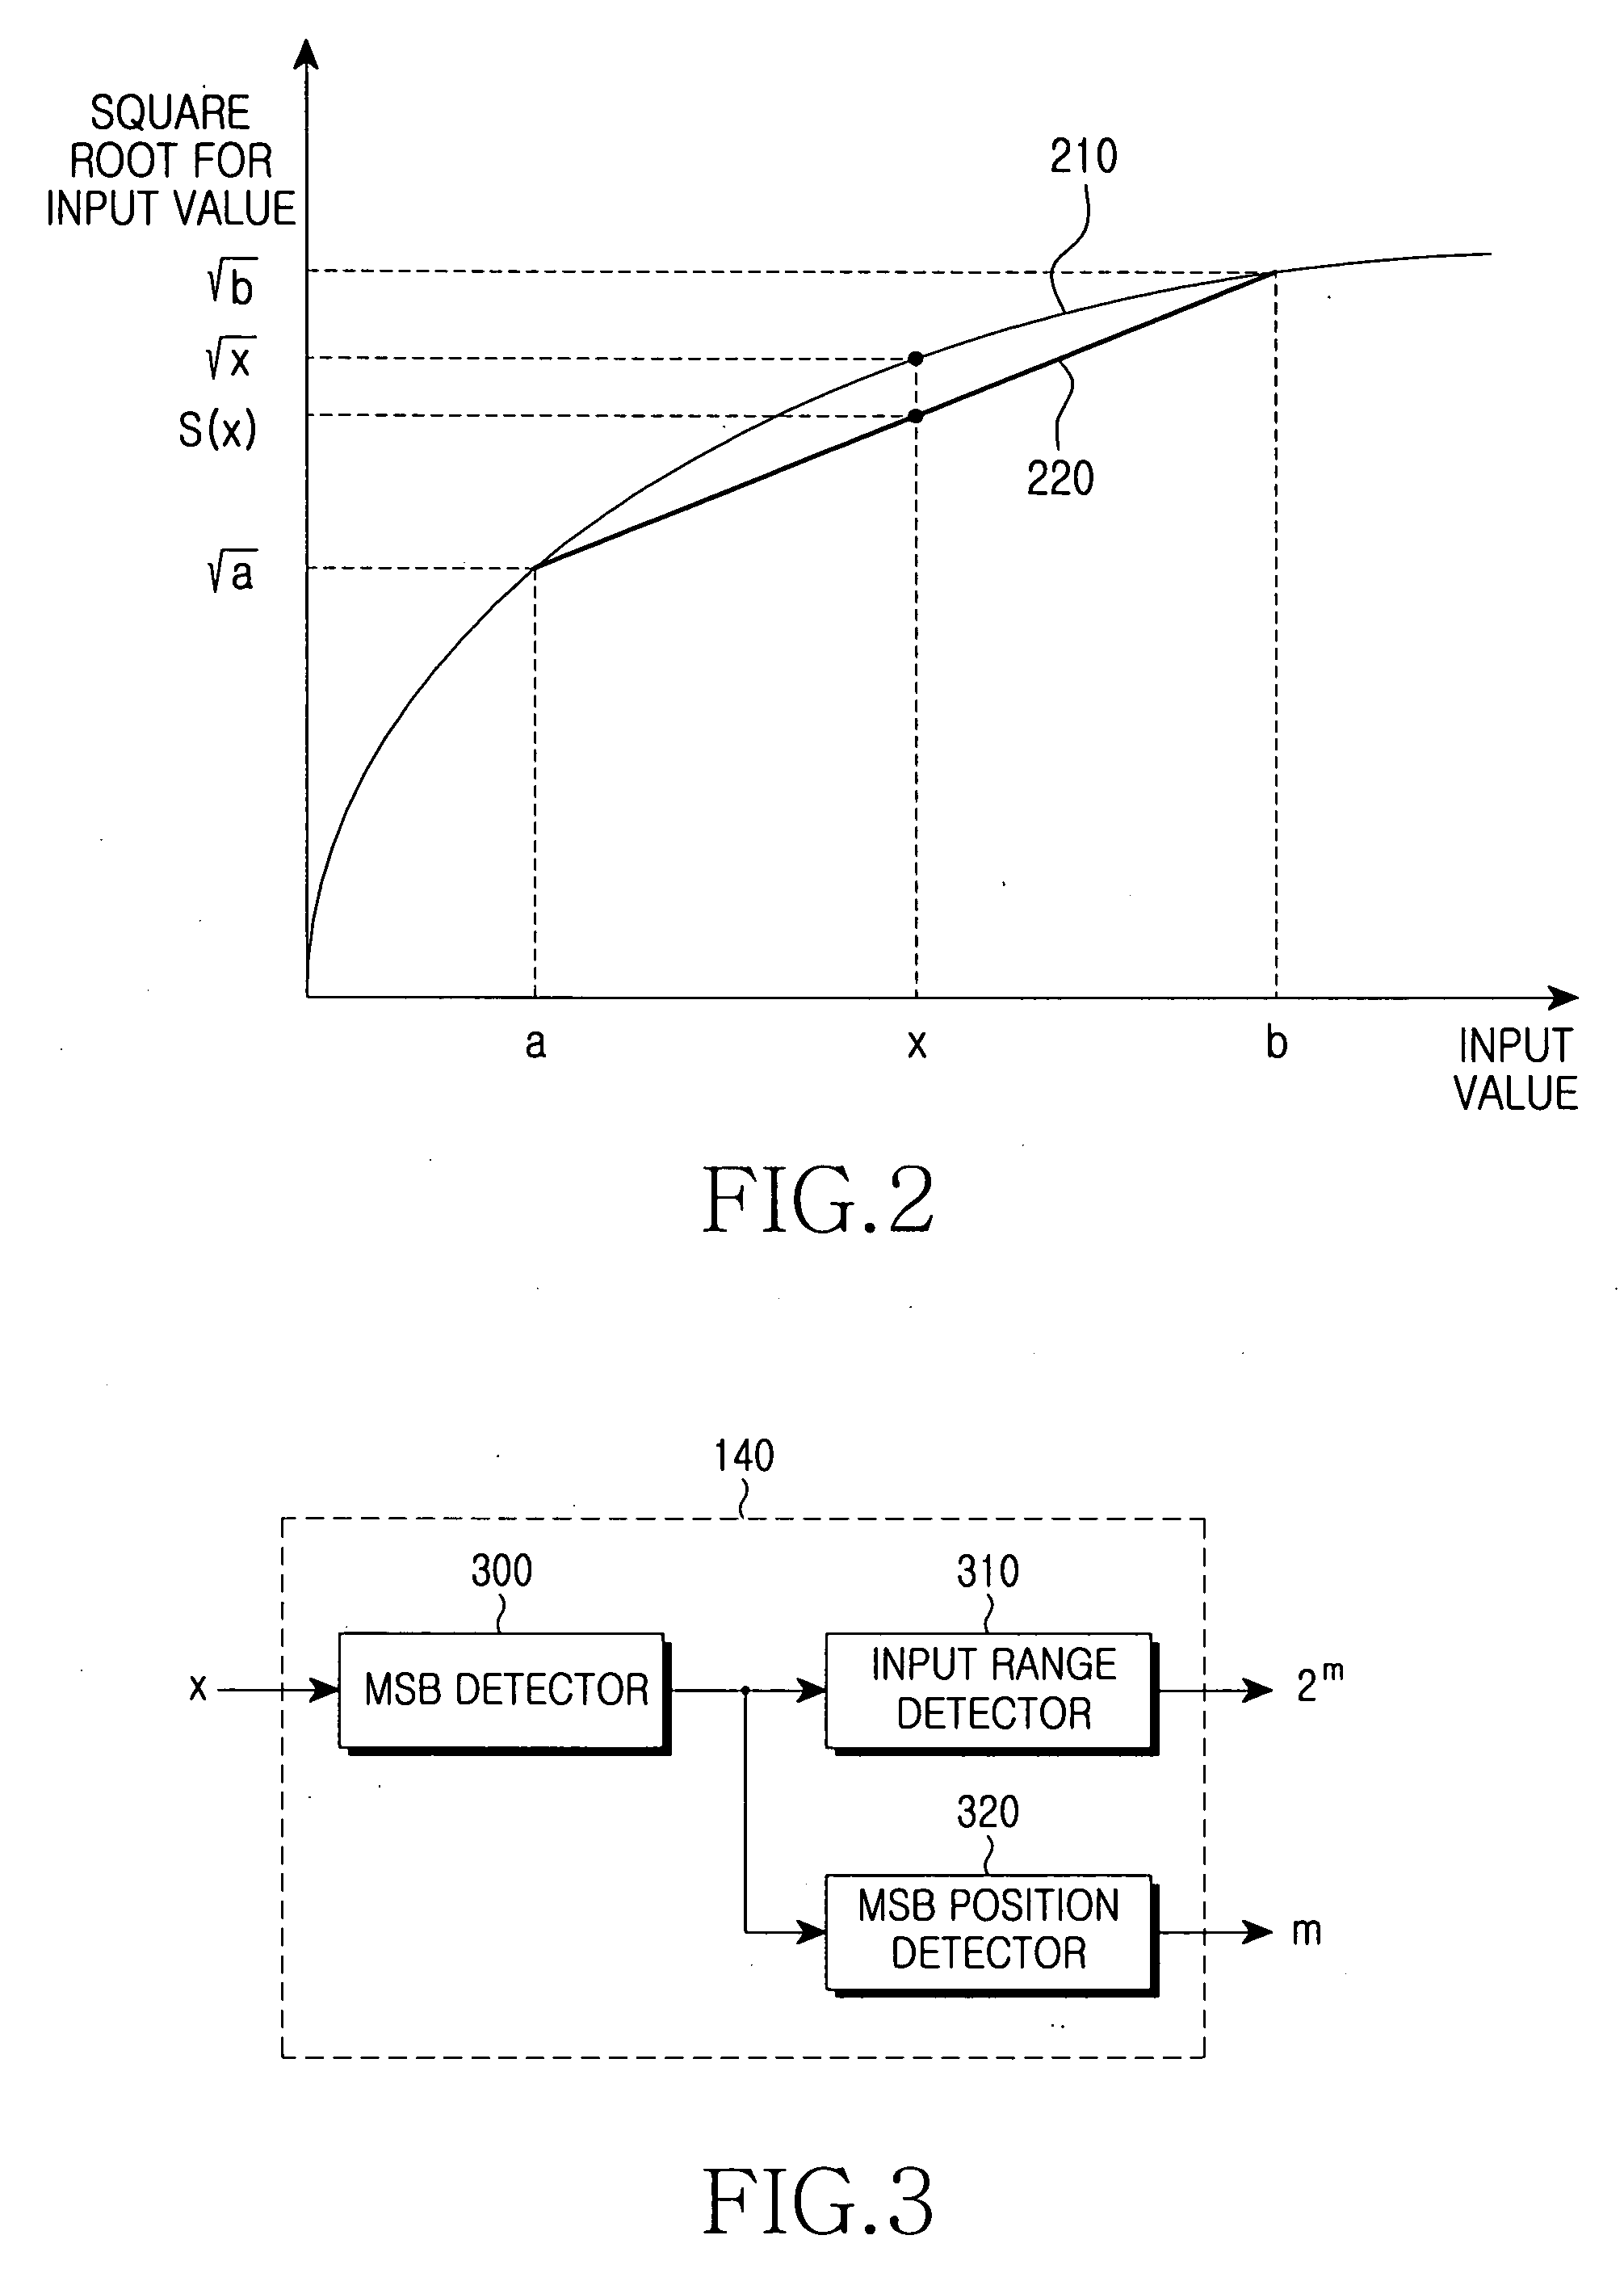 Apparatus and method for calculating square root